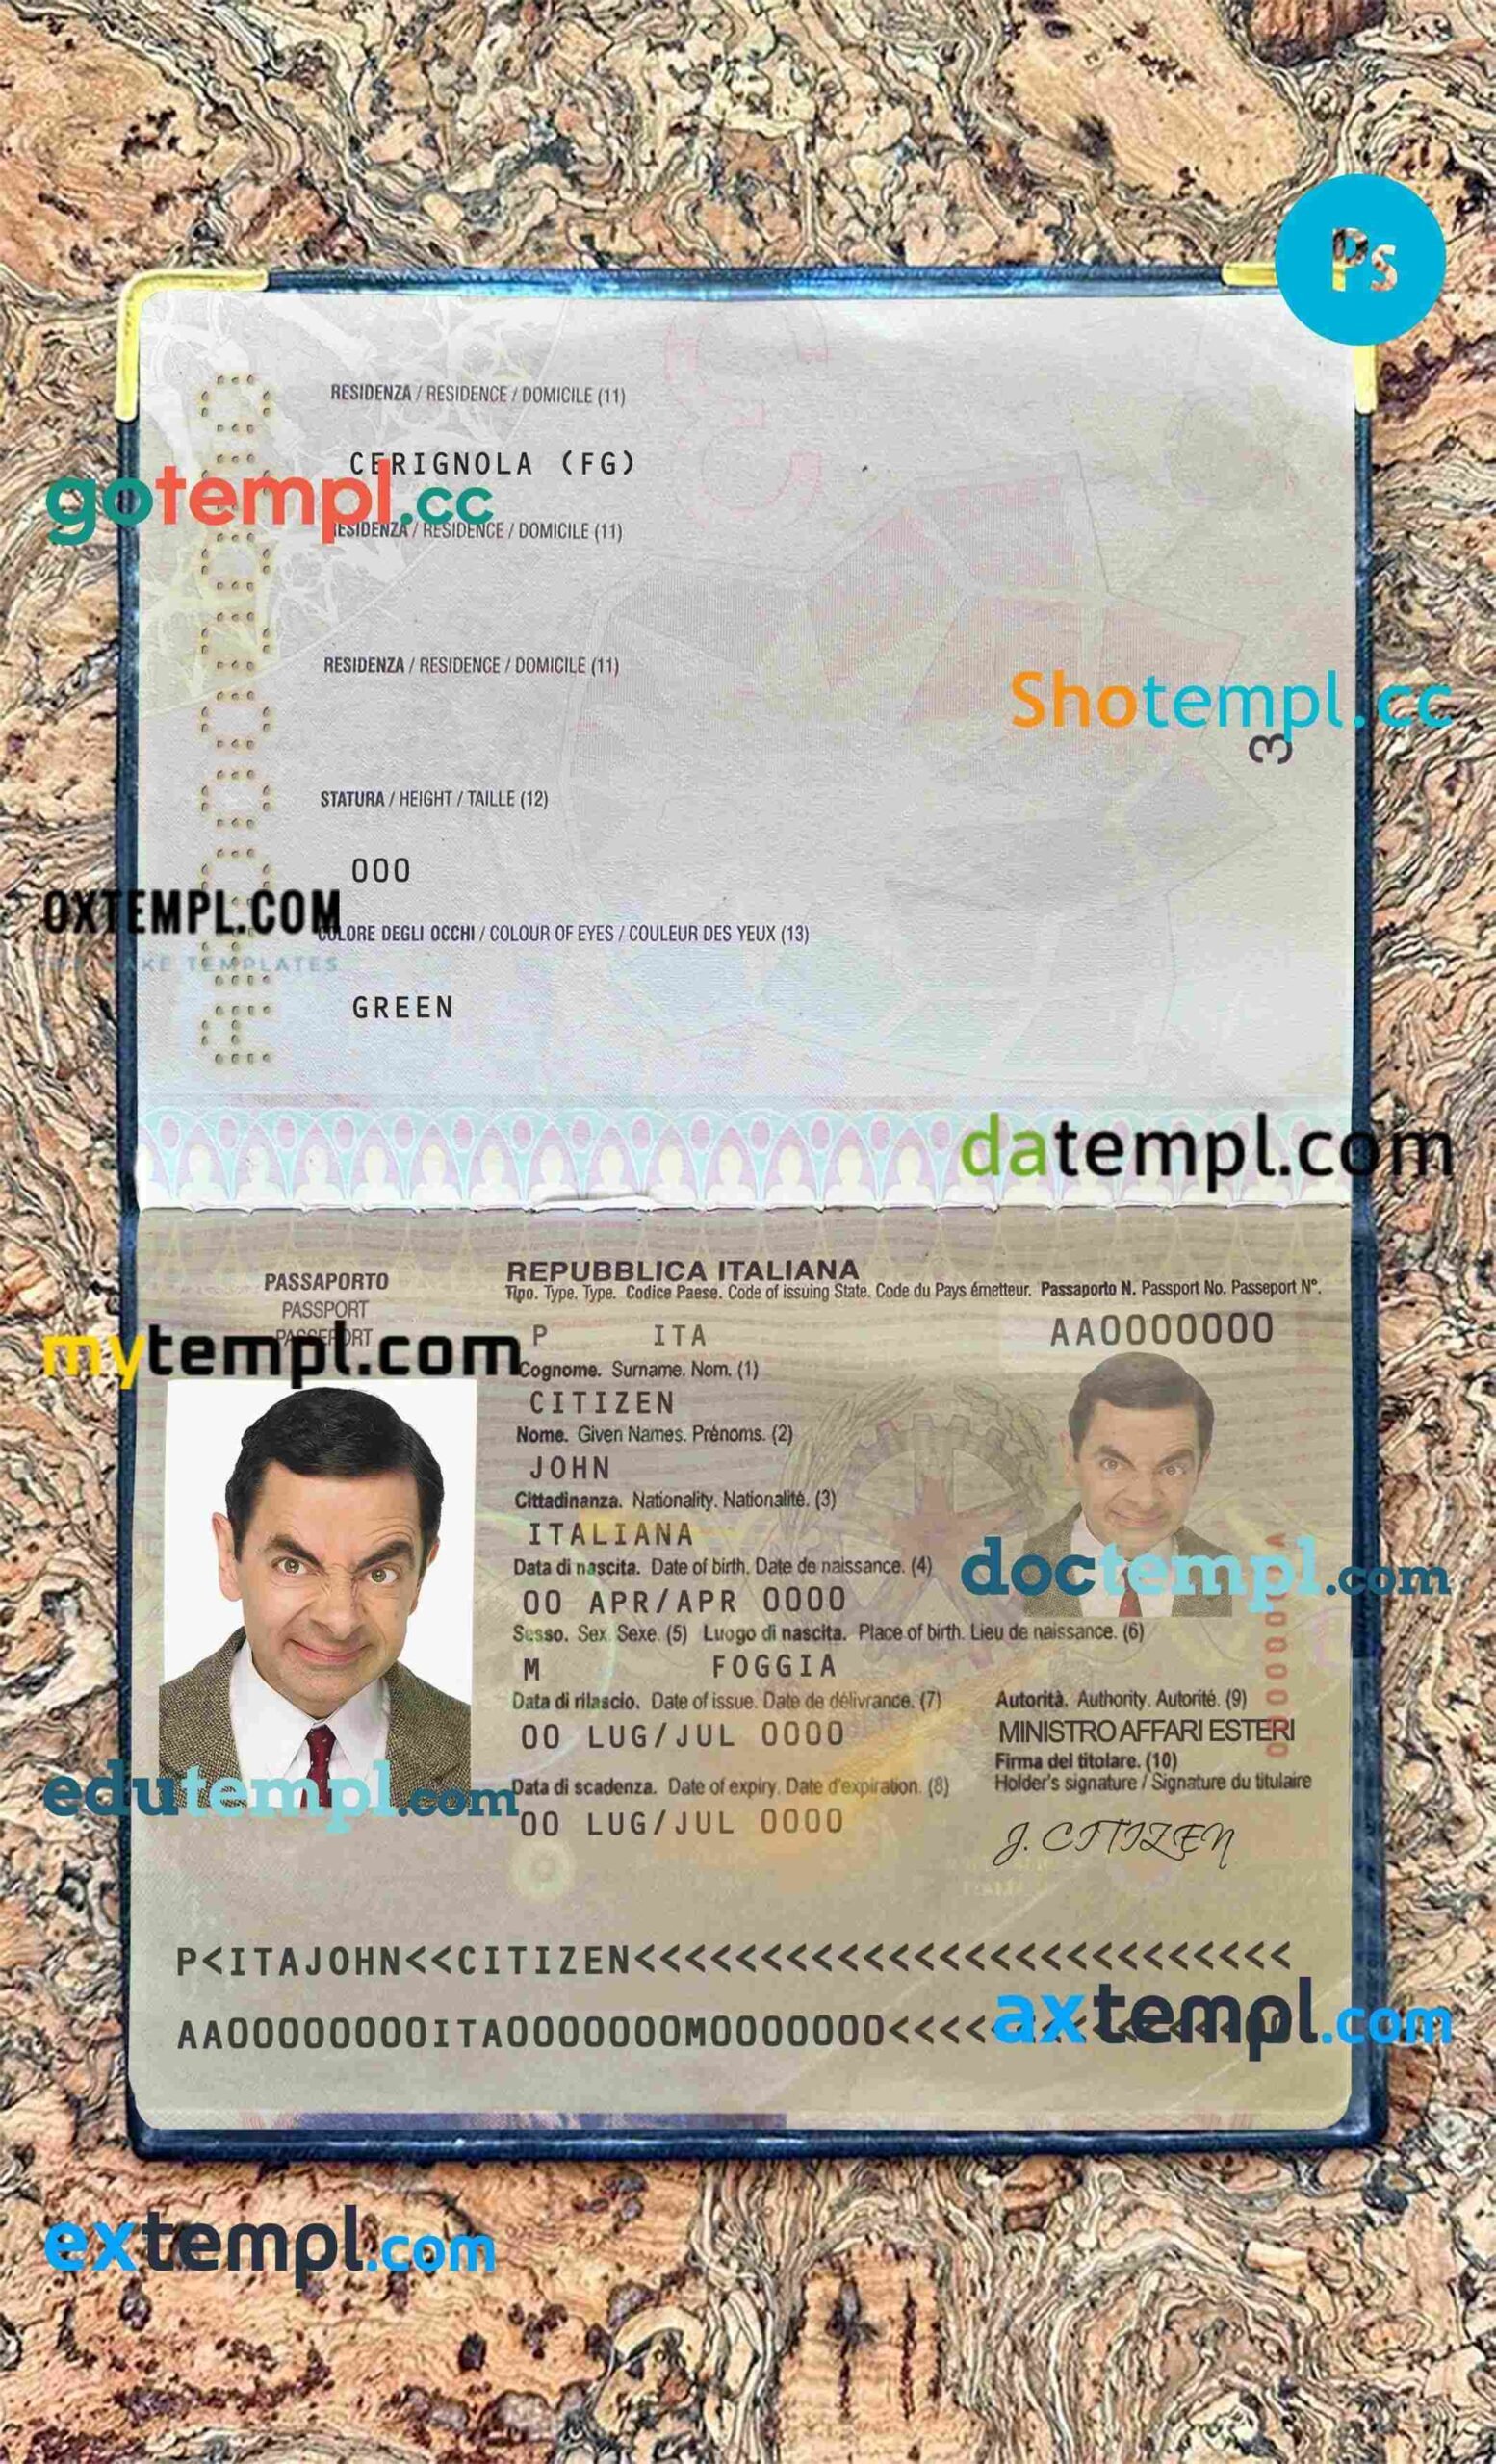 Lesotho driving license PSD template, with fonts